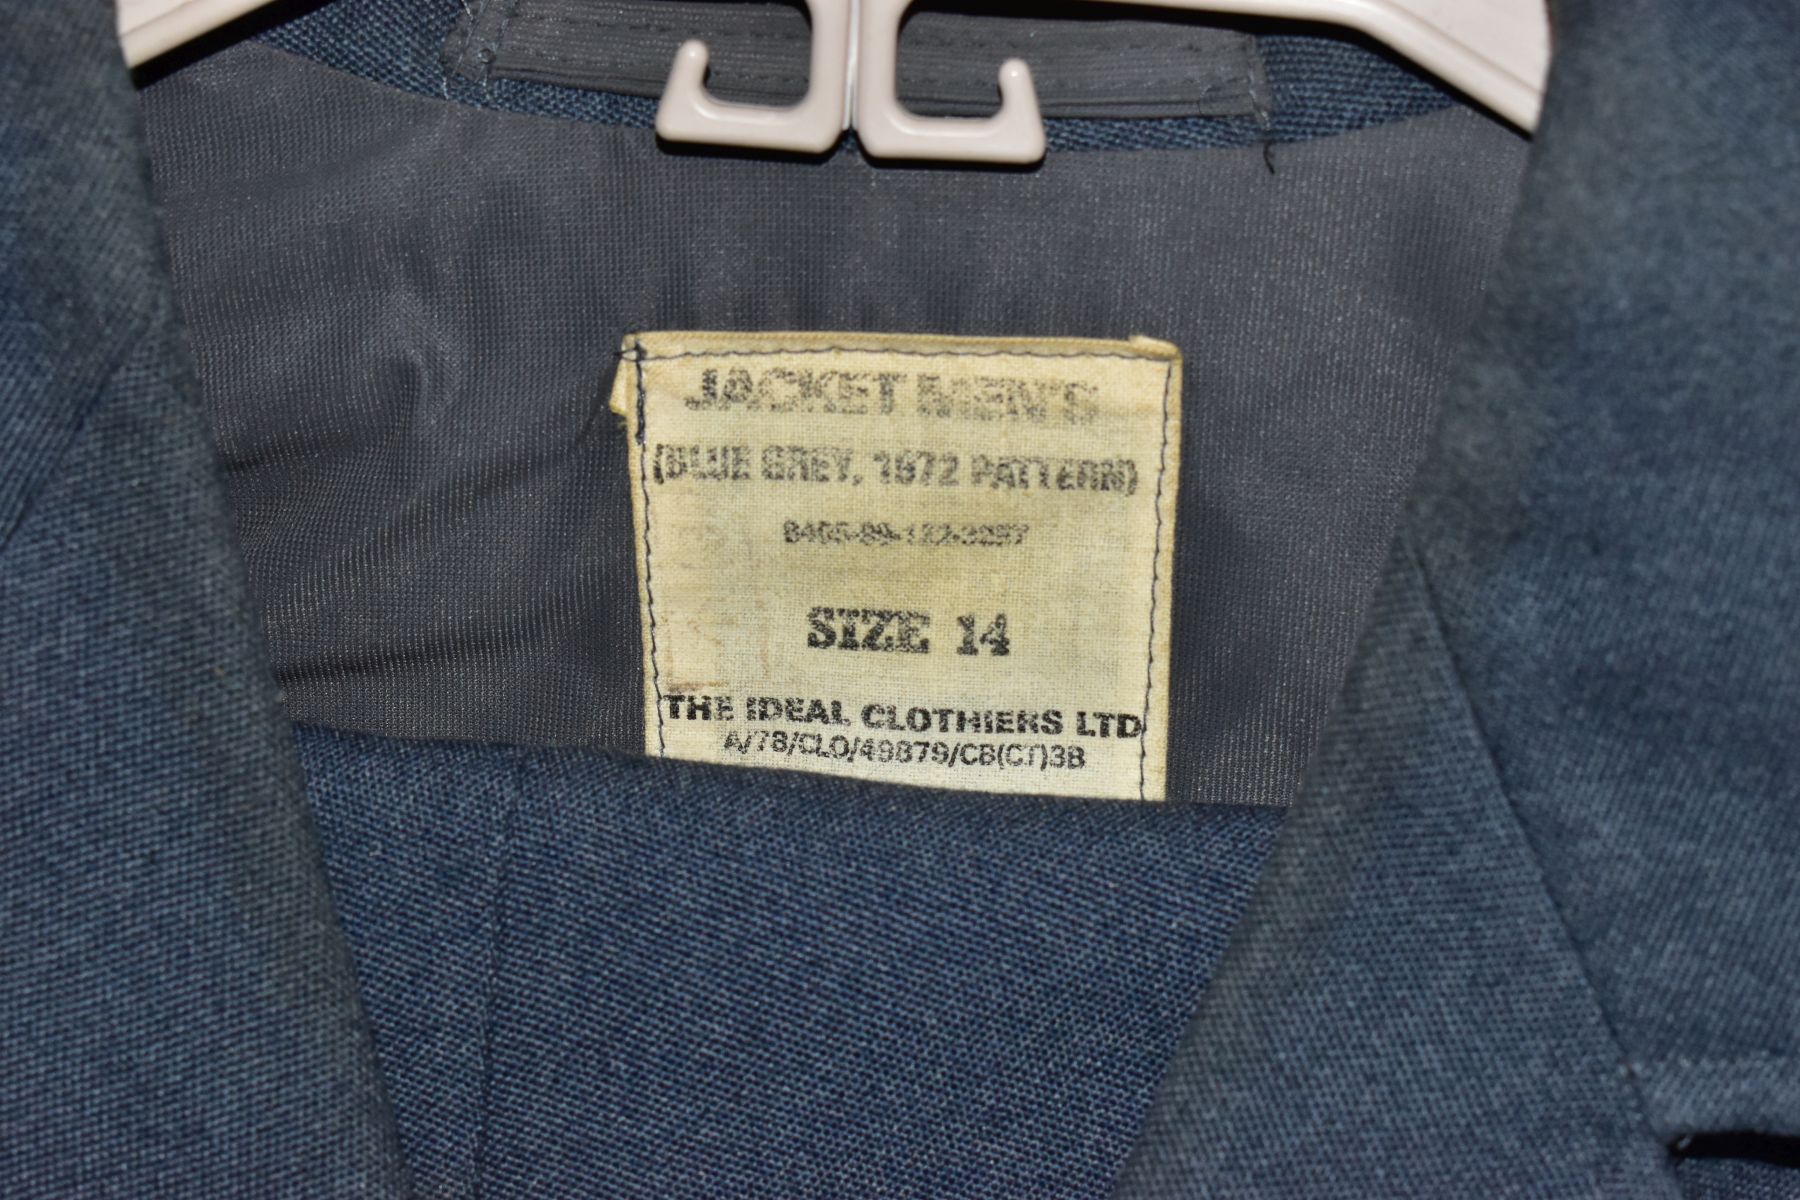 A BOX CONTAINING SEVERAL ITEMS OF ROYAL OBSERVER CORPS UNIFORM, to include jackets, trousers, blazer - Image 9 of 13